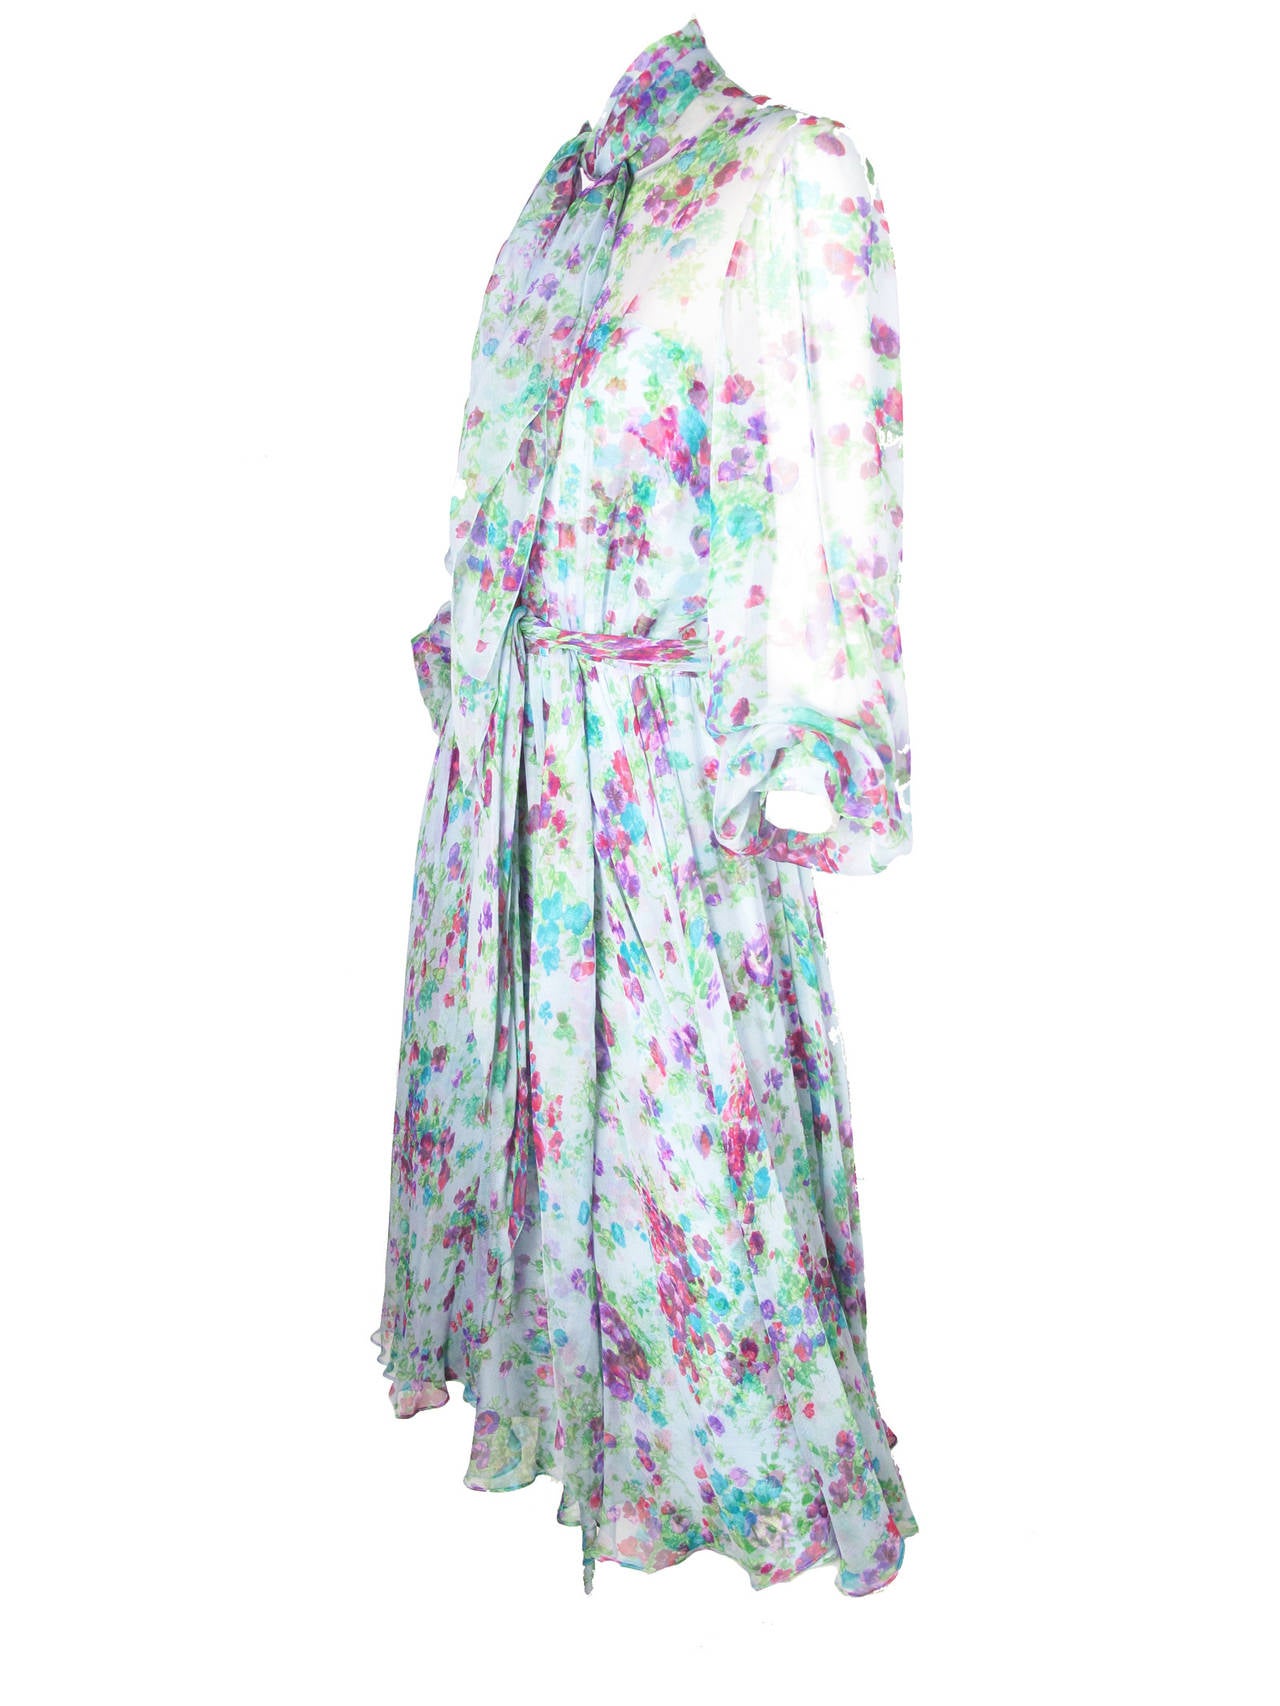 Alfred Bosand floral chiffon dress with neck scarf and belt.  Sheer sleeves and shoulders.
38